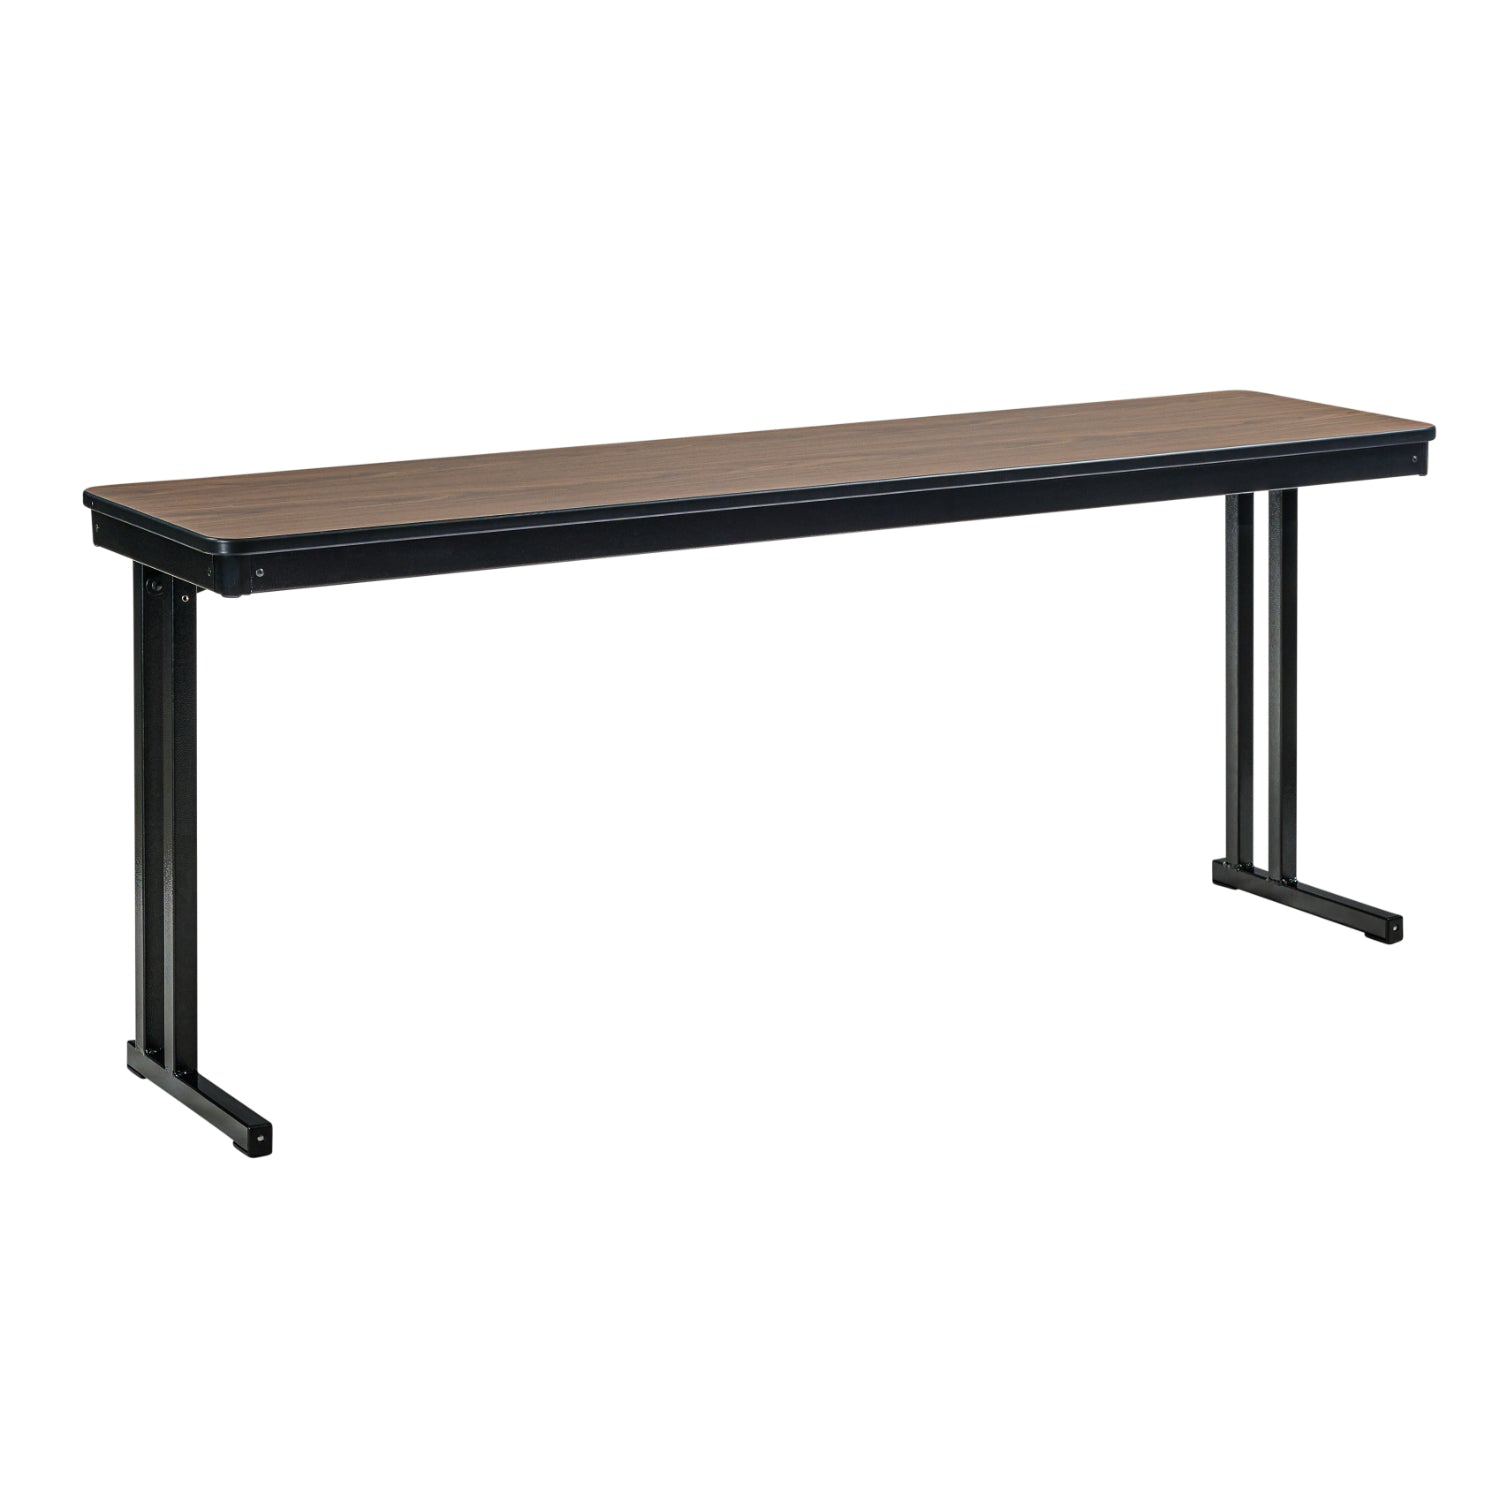 Max Seating Folding Training and Seminar Table with Cantilever Legs, 18" x 48", High Pressure Laminate Top with MDF Core/ProtectEdge